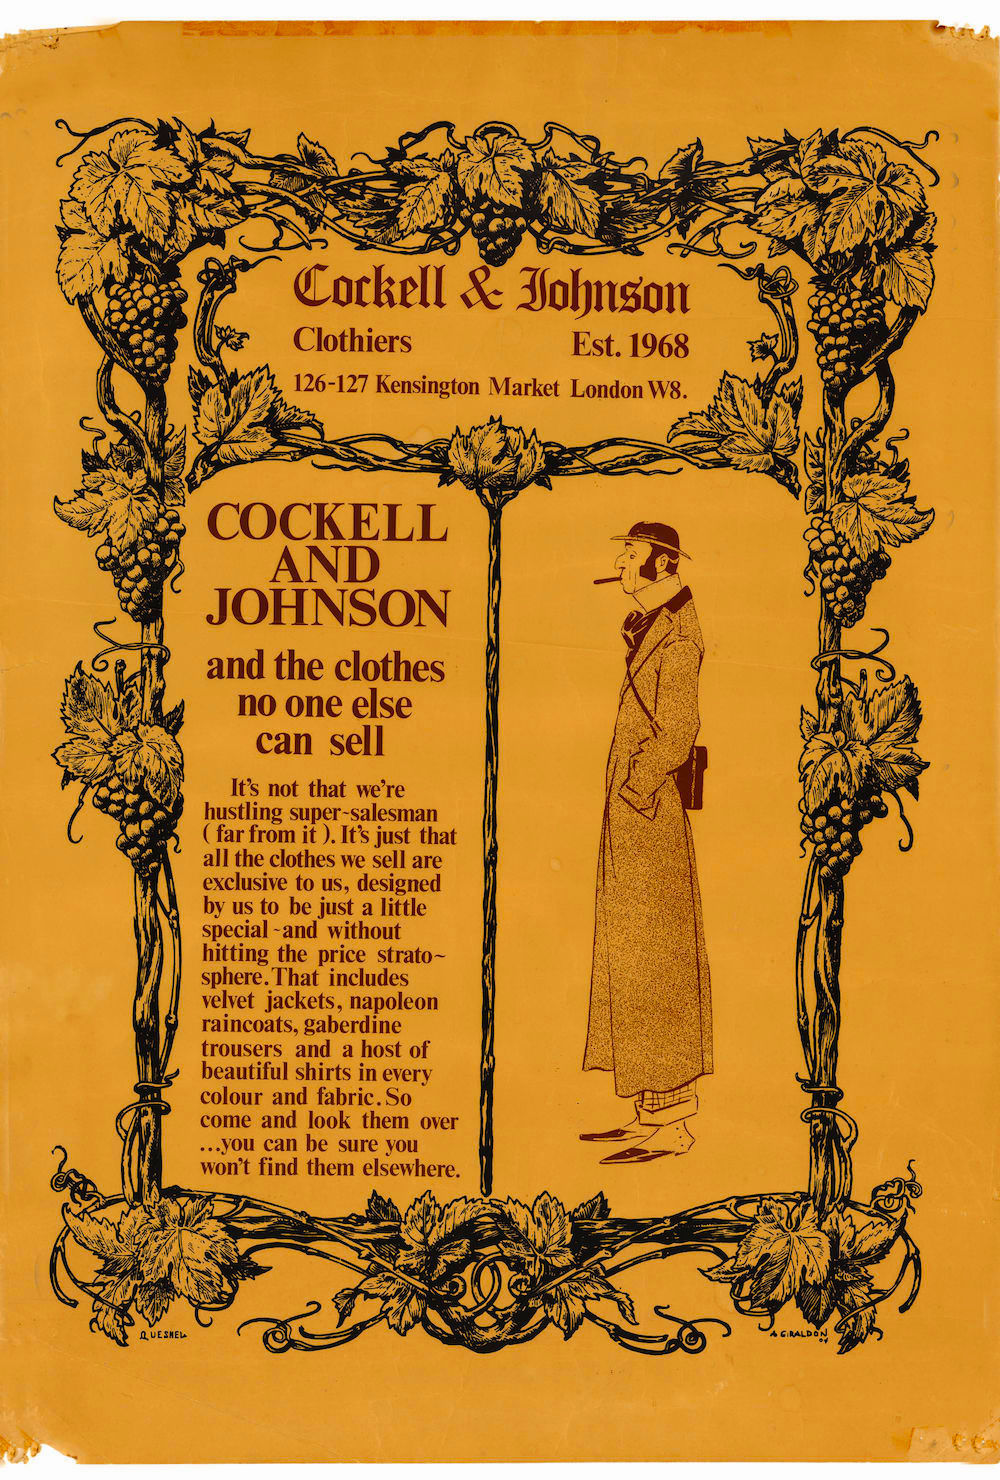 Cockell & Johnson poster, late 60s. ©Lloyd Johnson. No reproduction without permission.